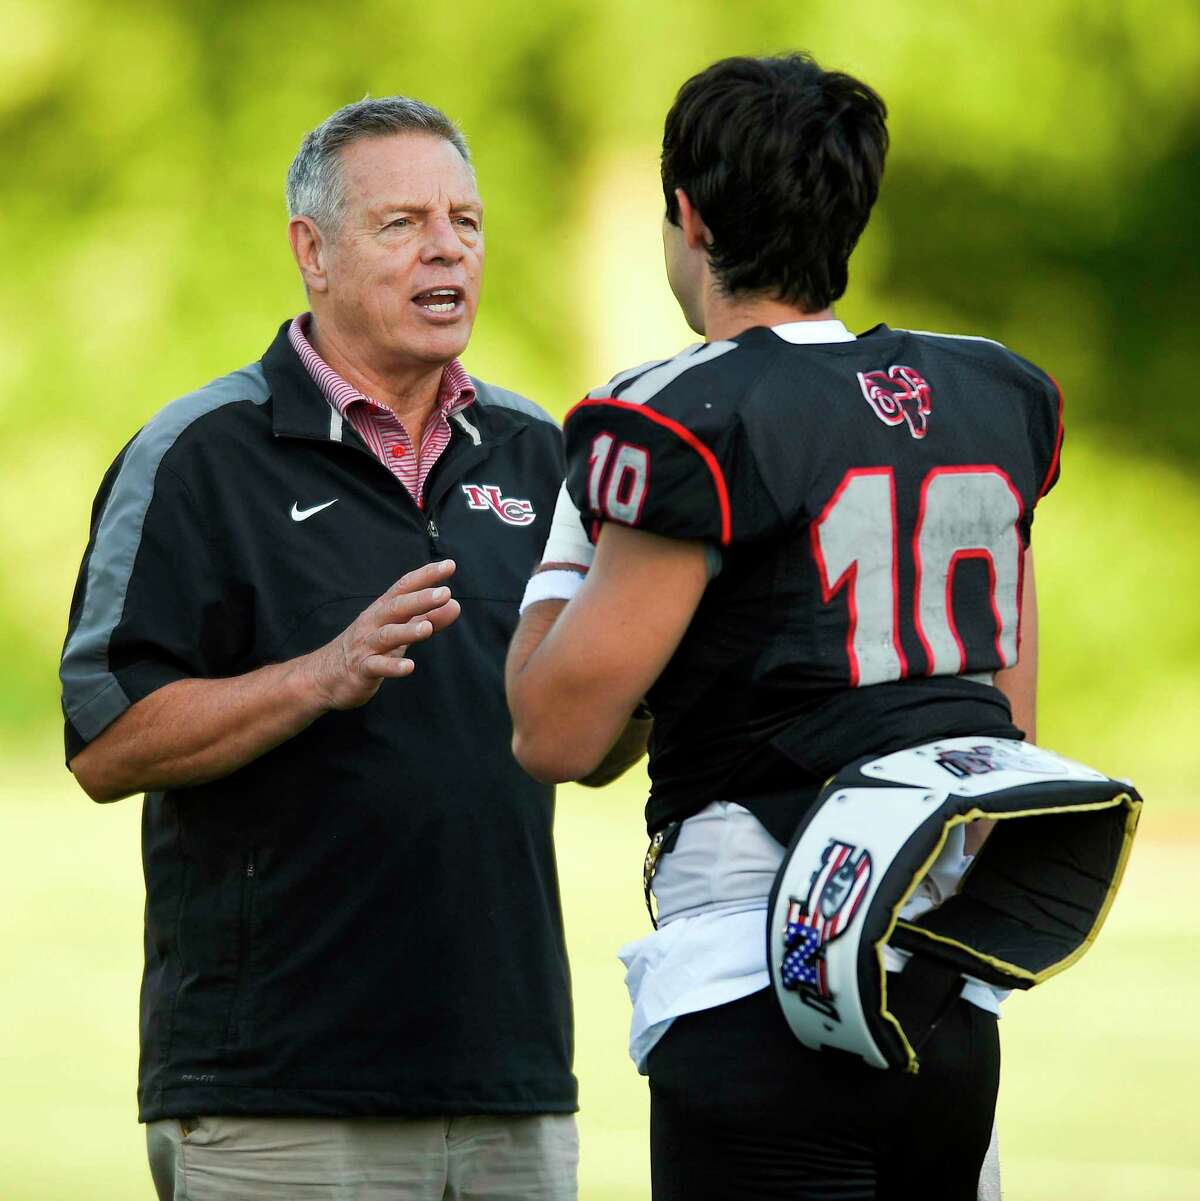 New Canaan coach Lou Marinelli chats with quarterback Drew Pyne during the 11th Annual Brian Wilderman Memorial Red and White football game at Dunning Stadium in New Canaan on June 15, 2018.